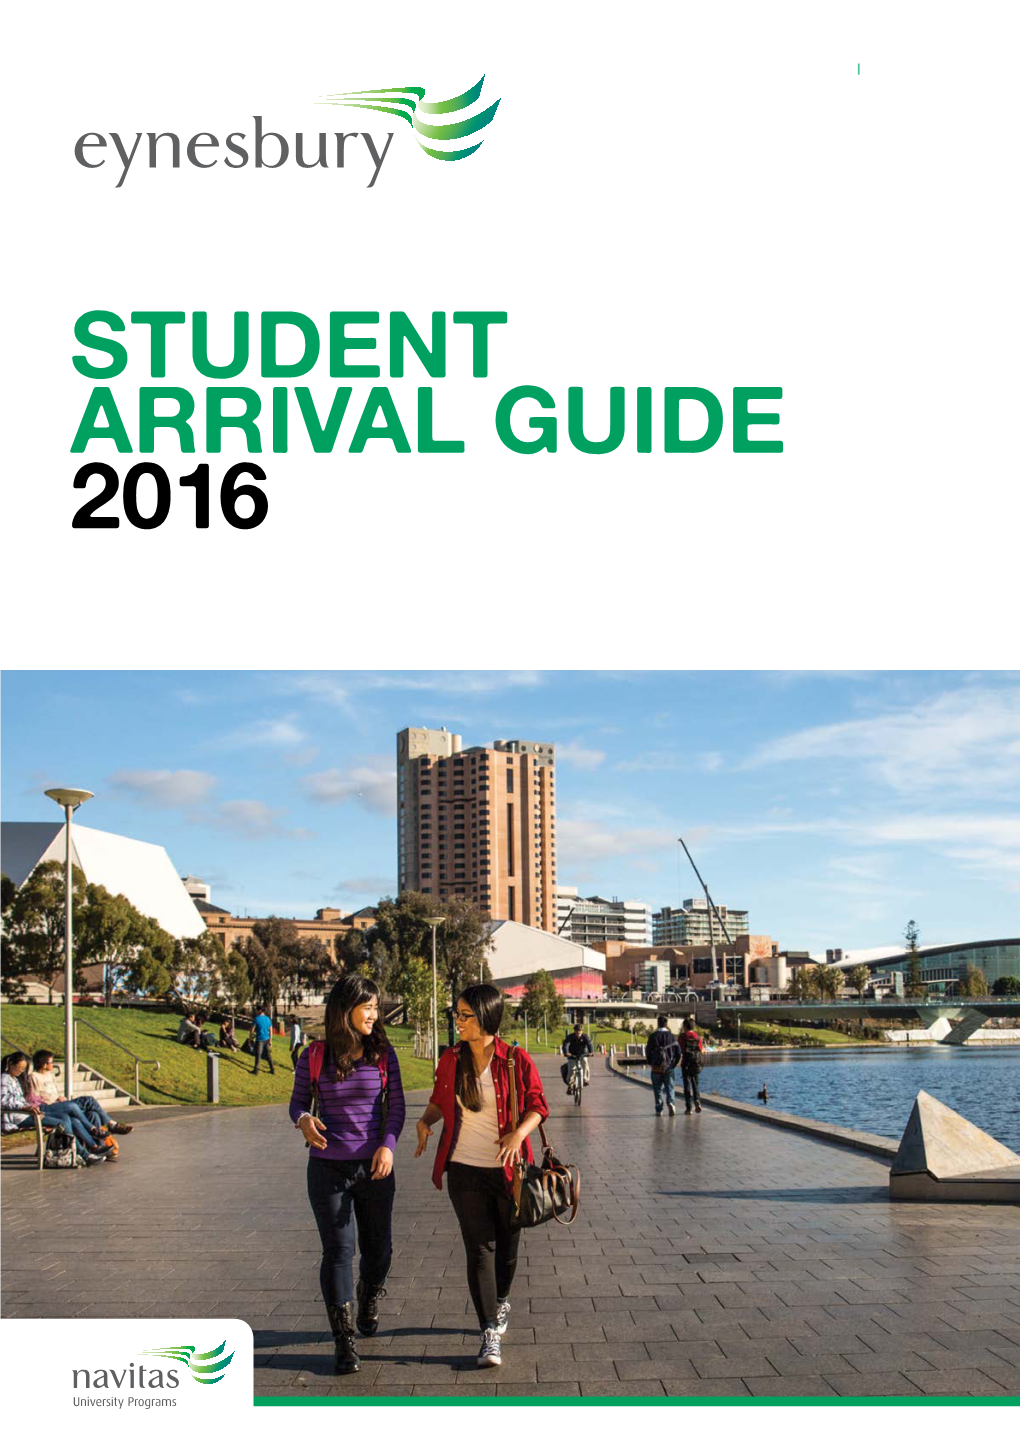 STUDENT ARRIVAL GUIDE 2016 EYNESBURY Student Arrival Guide 2016 WELCOME 1 EYNESBURY Student Arrival Guide 2016 Main Contents